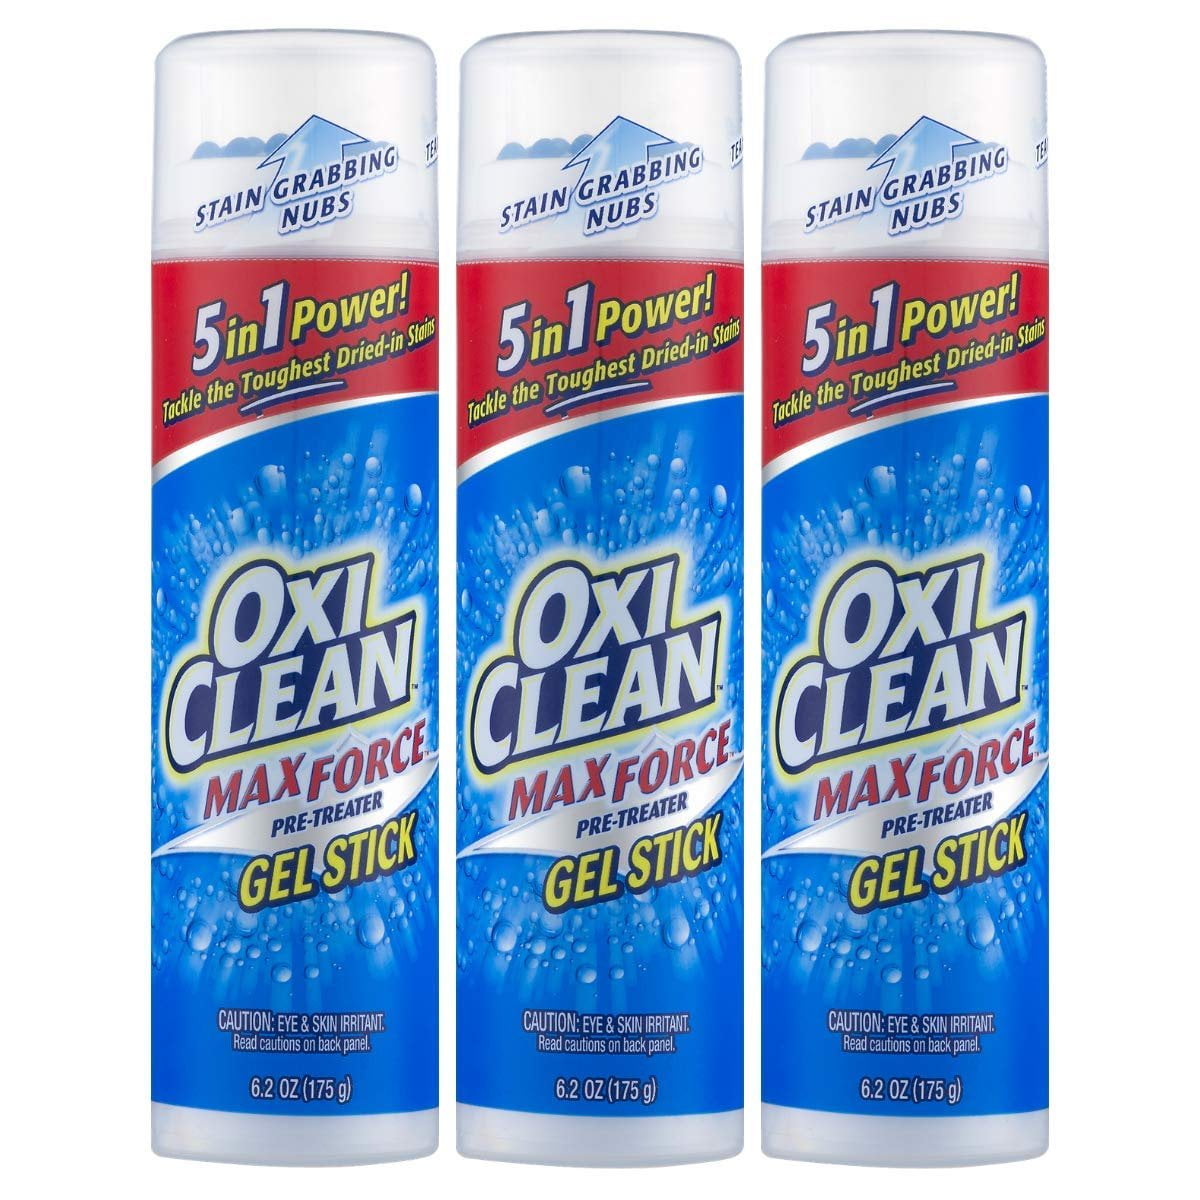 OxiClean Max Force Gel Stick, 6.2 Ounce, 3 Pack 